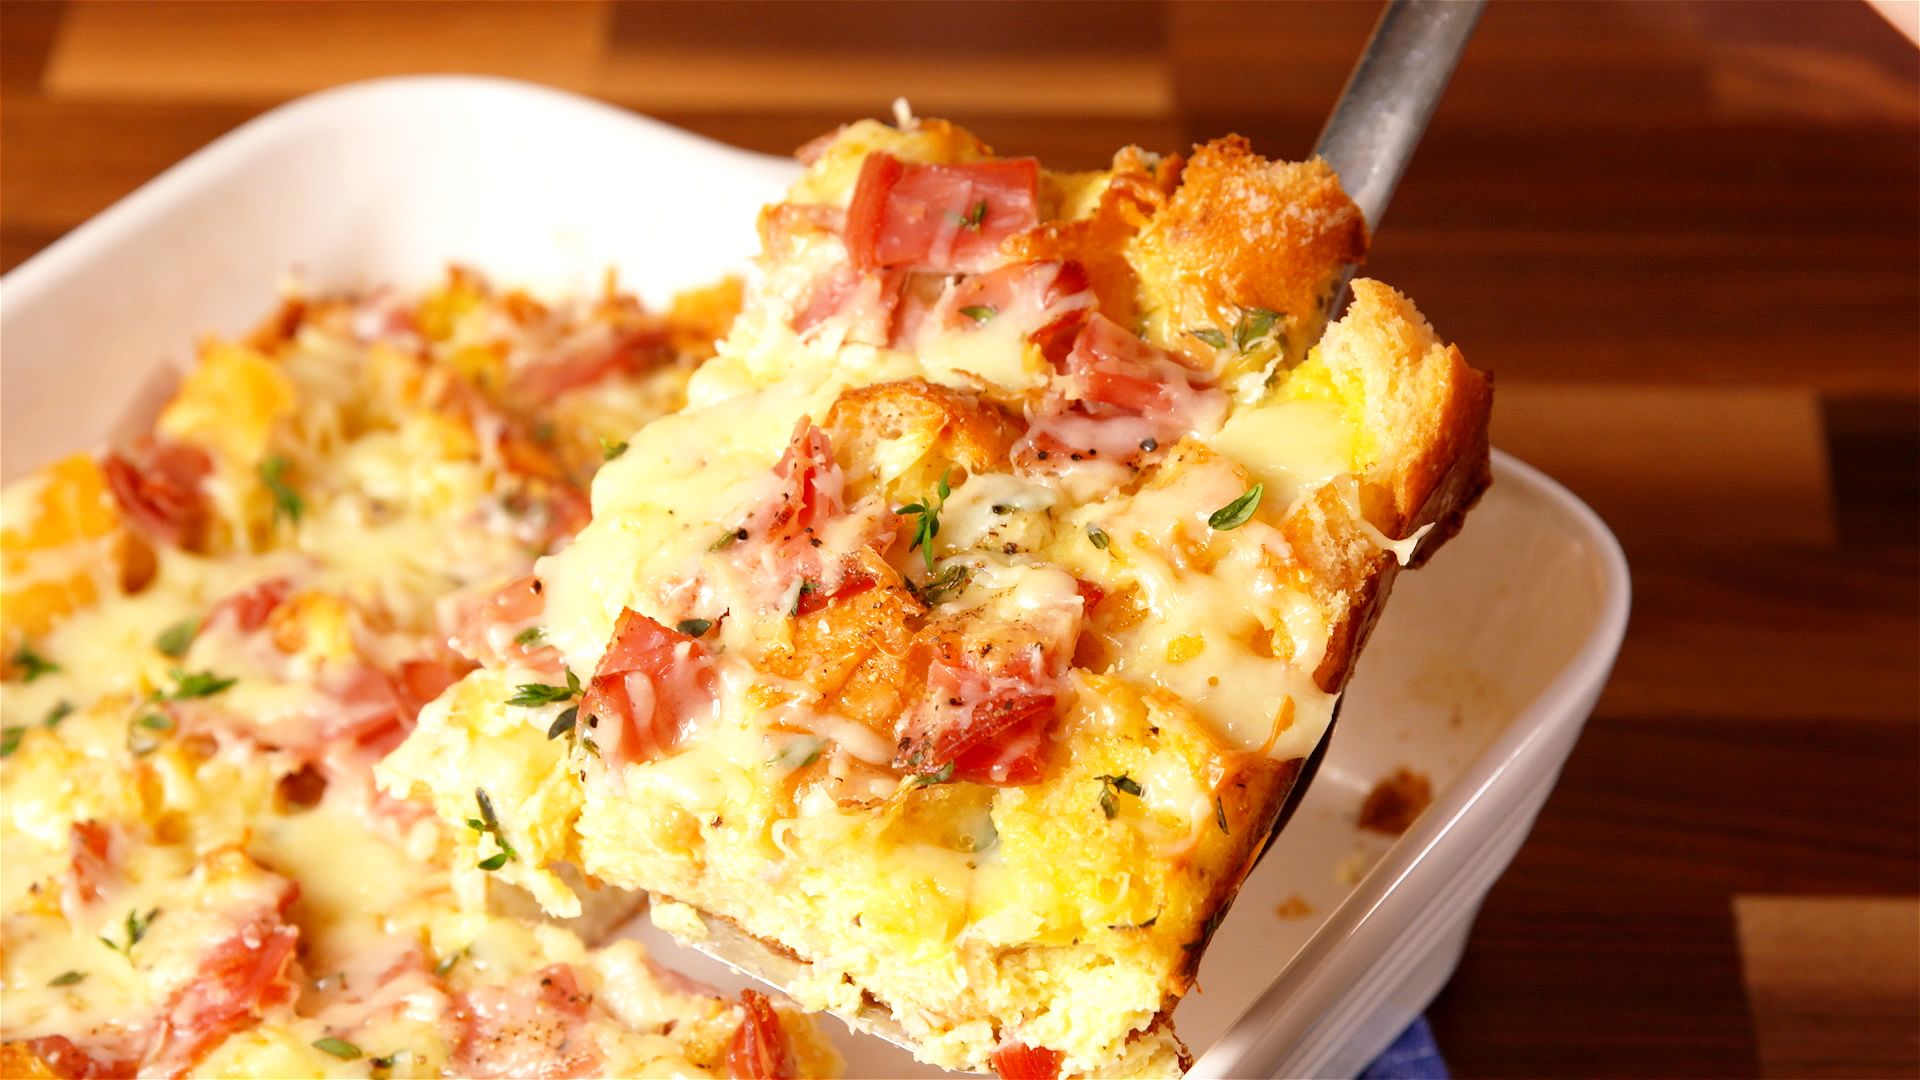 Best Ham Cheese Breakfast Casserole Recipe How To Make Ham Cheese Brunch Bake,Lol Doll Collectors Guide